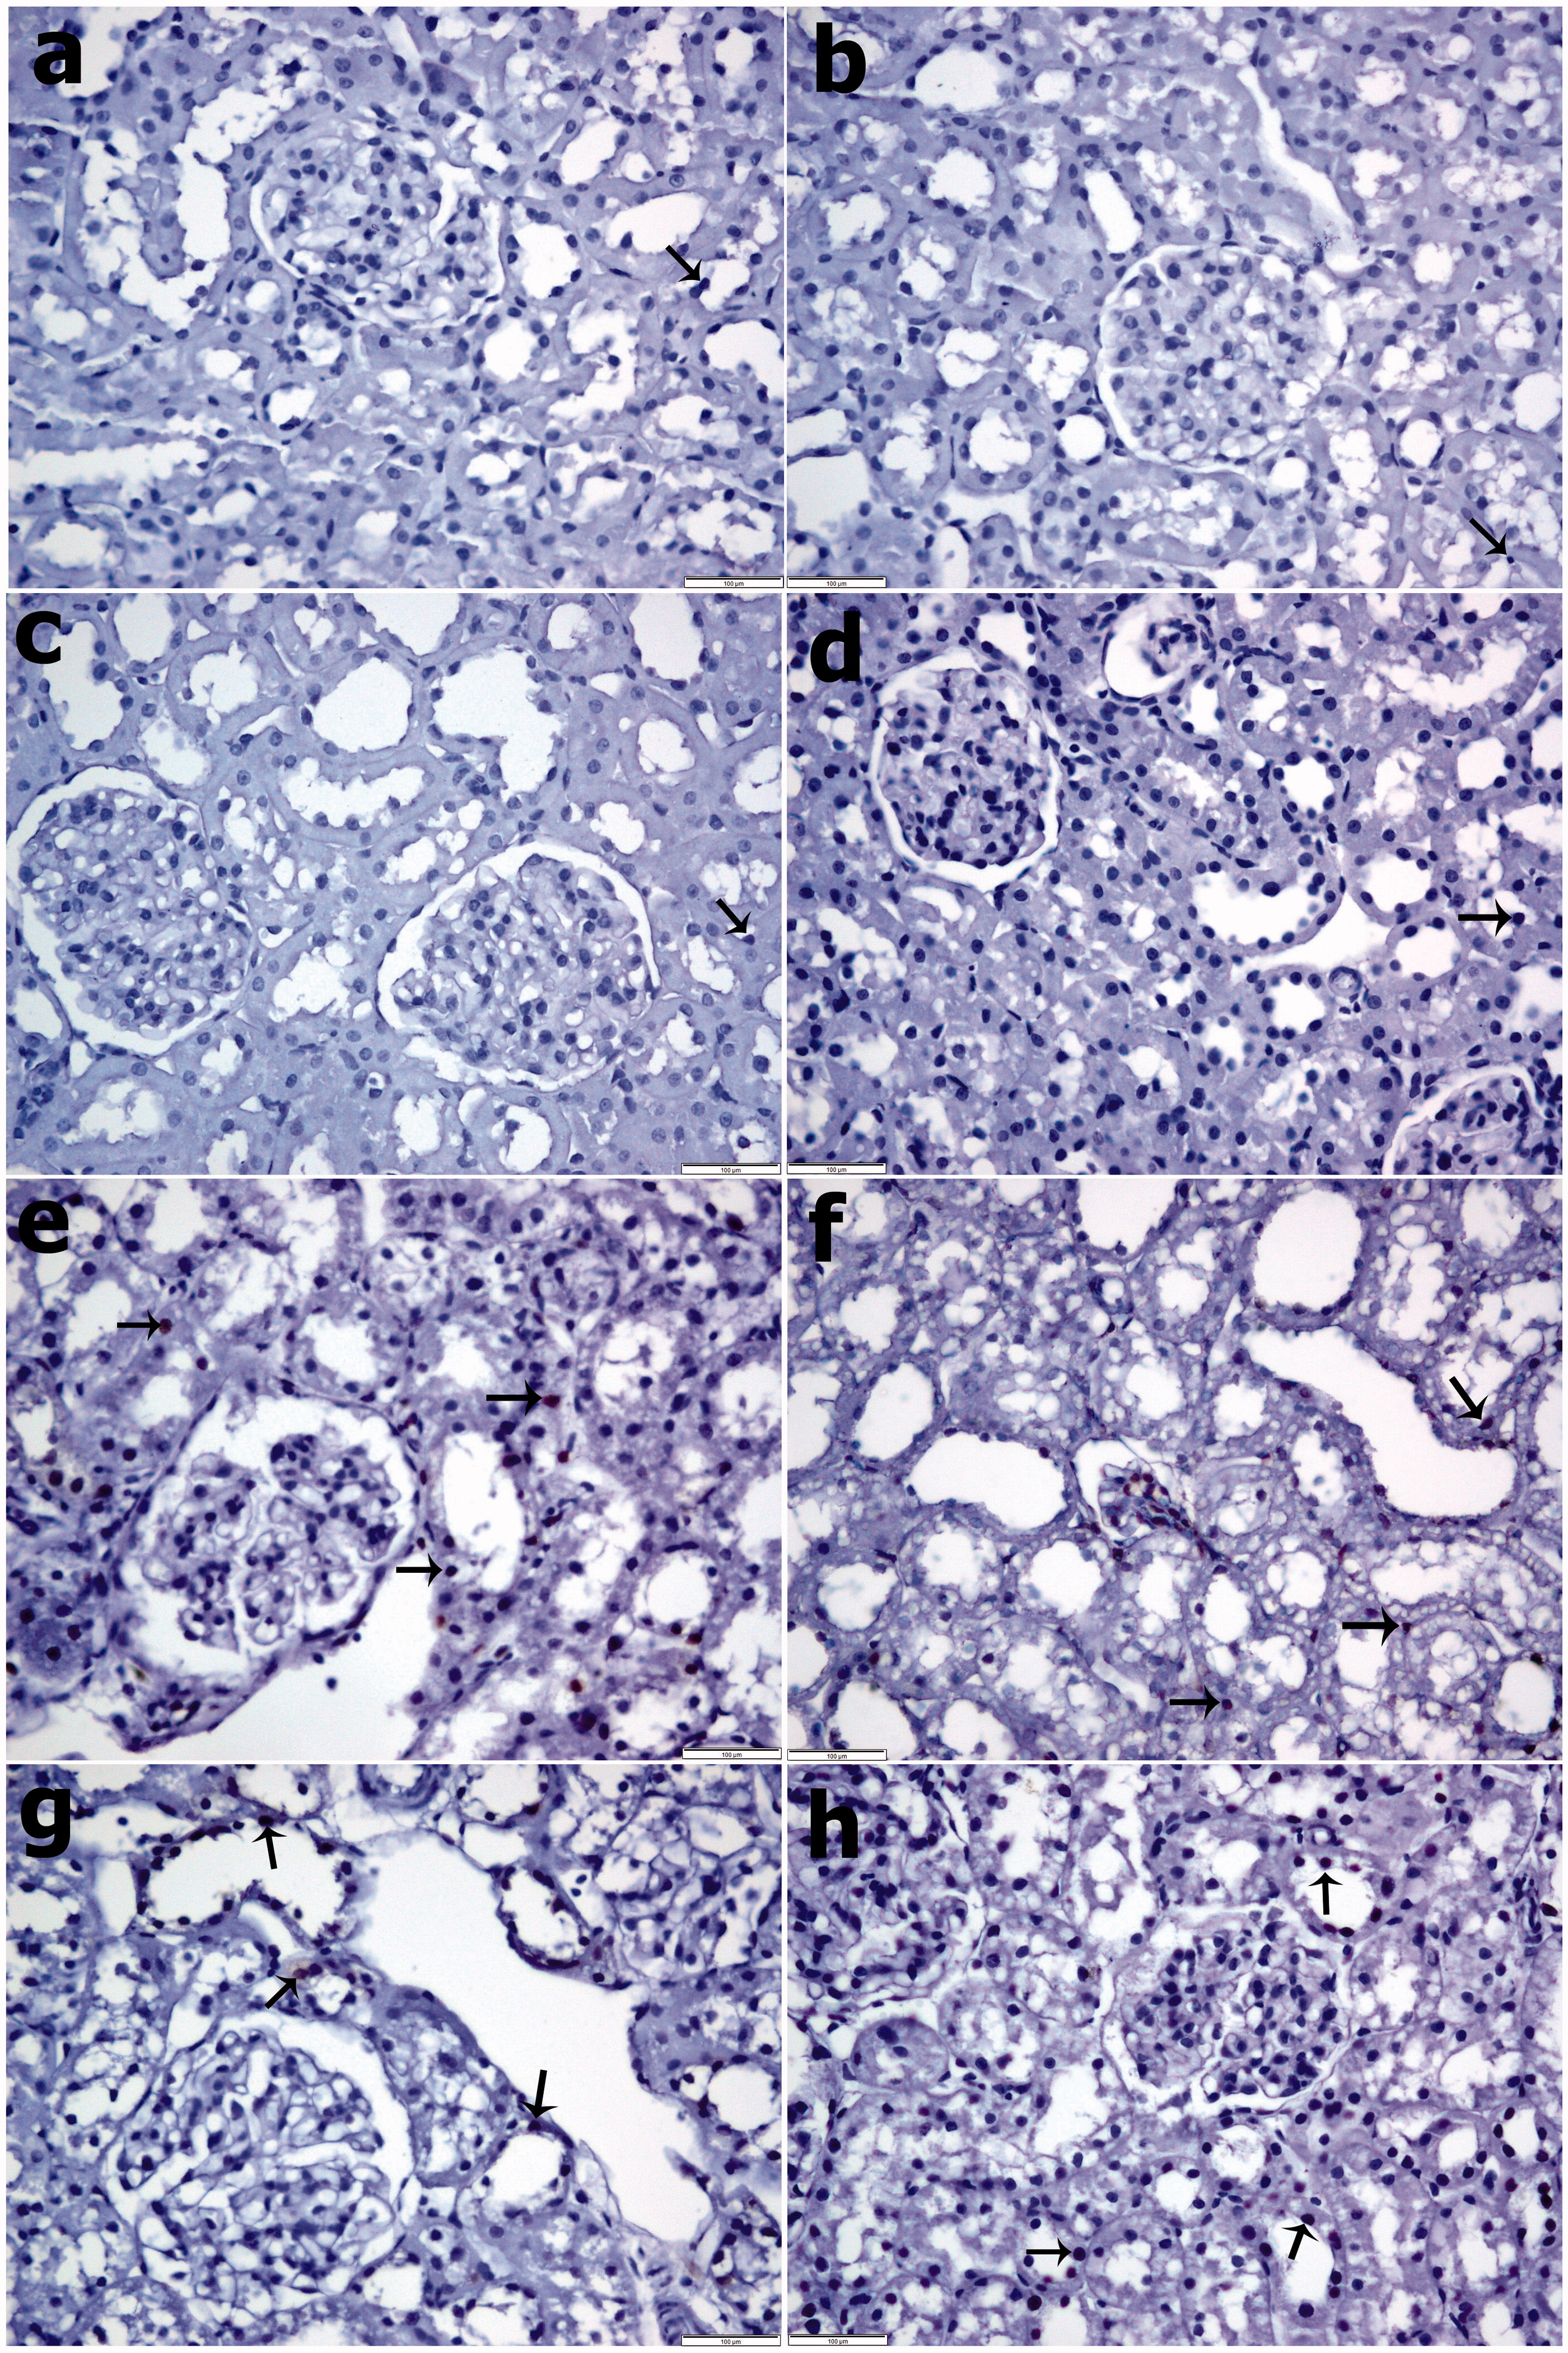 Figure 3. TUNEL staining. (a) Control group, (b) PBS group, (c) SPC2 group, (d) SPC10 group, (e) Contrast group, (f) Contrast + PBS, (g) Contrast + SPC2 group, and (h) Contrast + SPC10 group. Control, PBS, SPC2, and SPC10 groups a small number of TUNEL-positive cells were observed in the renal tissue. In the Contrast group that TUNEL-positive cells were significantly higher in the renal tissues. Contrast + SPC2 and Contrast + SPC10 groups, TUNEL-positive cells were significantly decreased in the renal compared with contrast group. (Arrows: TUNEL positive cells) (TUNEL staining, magnifications: ×400).